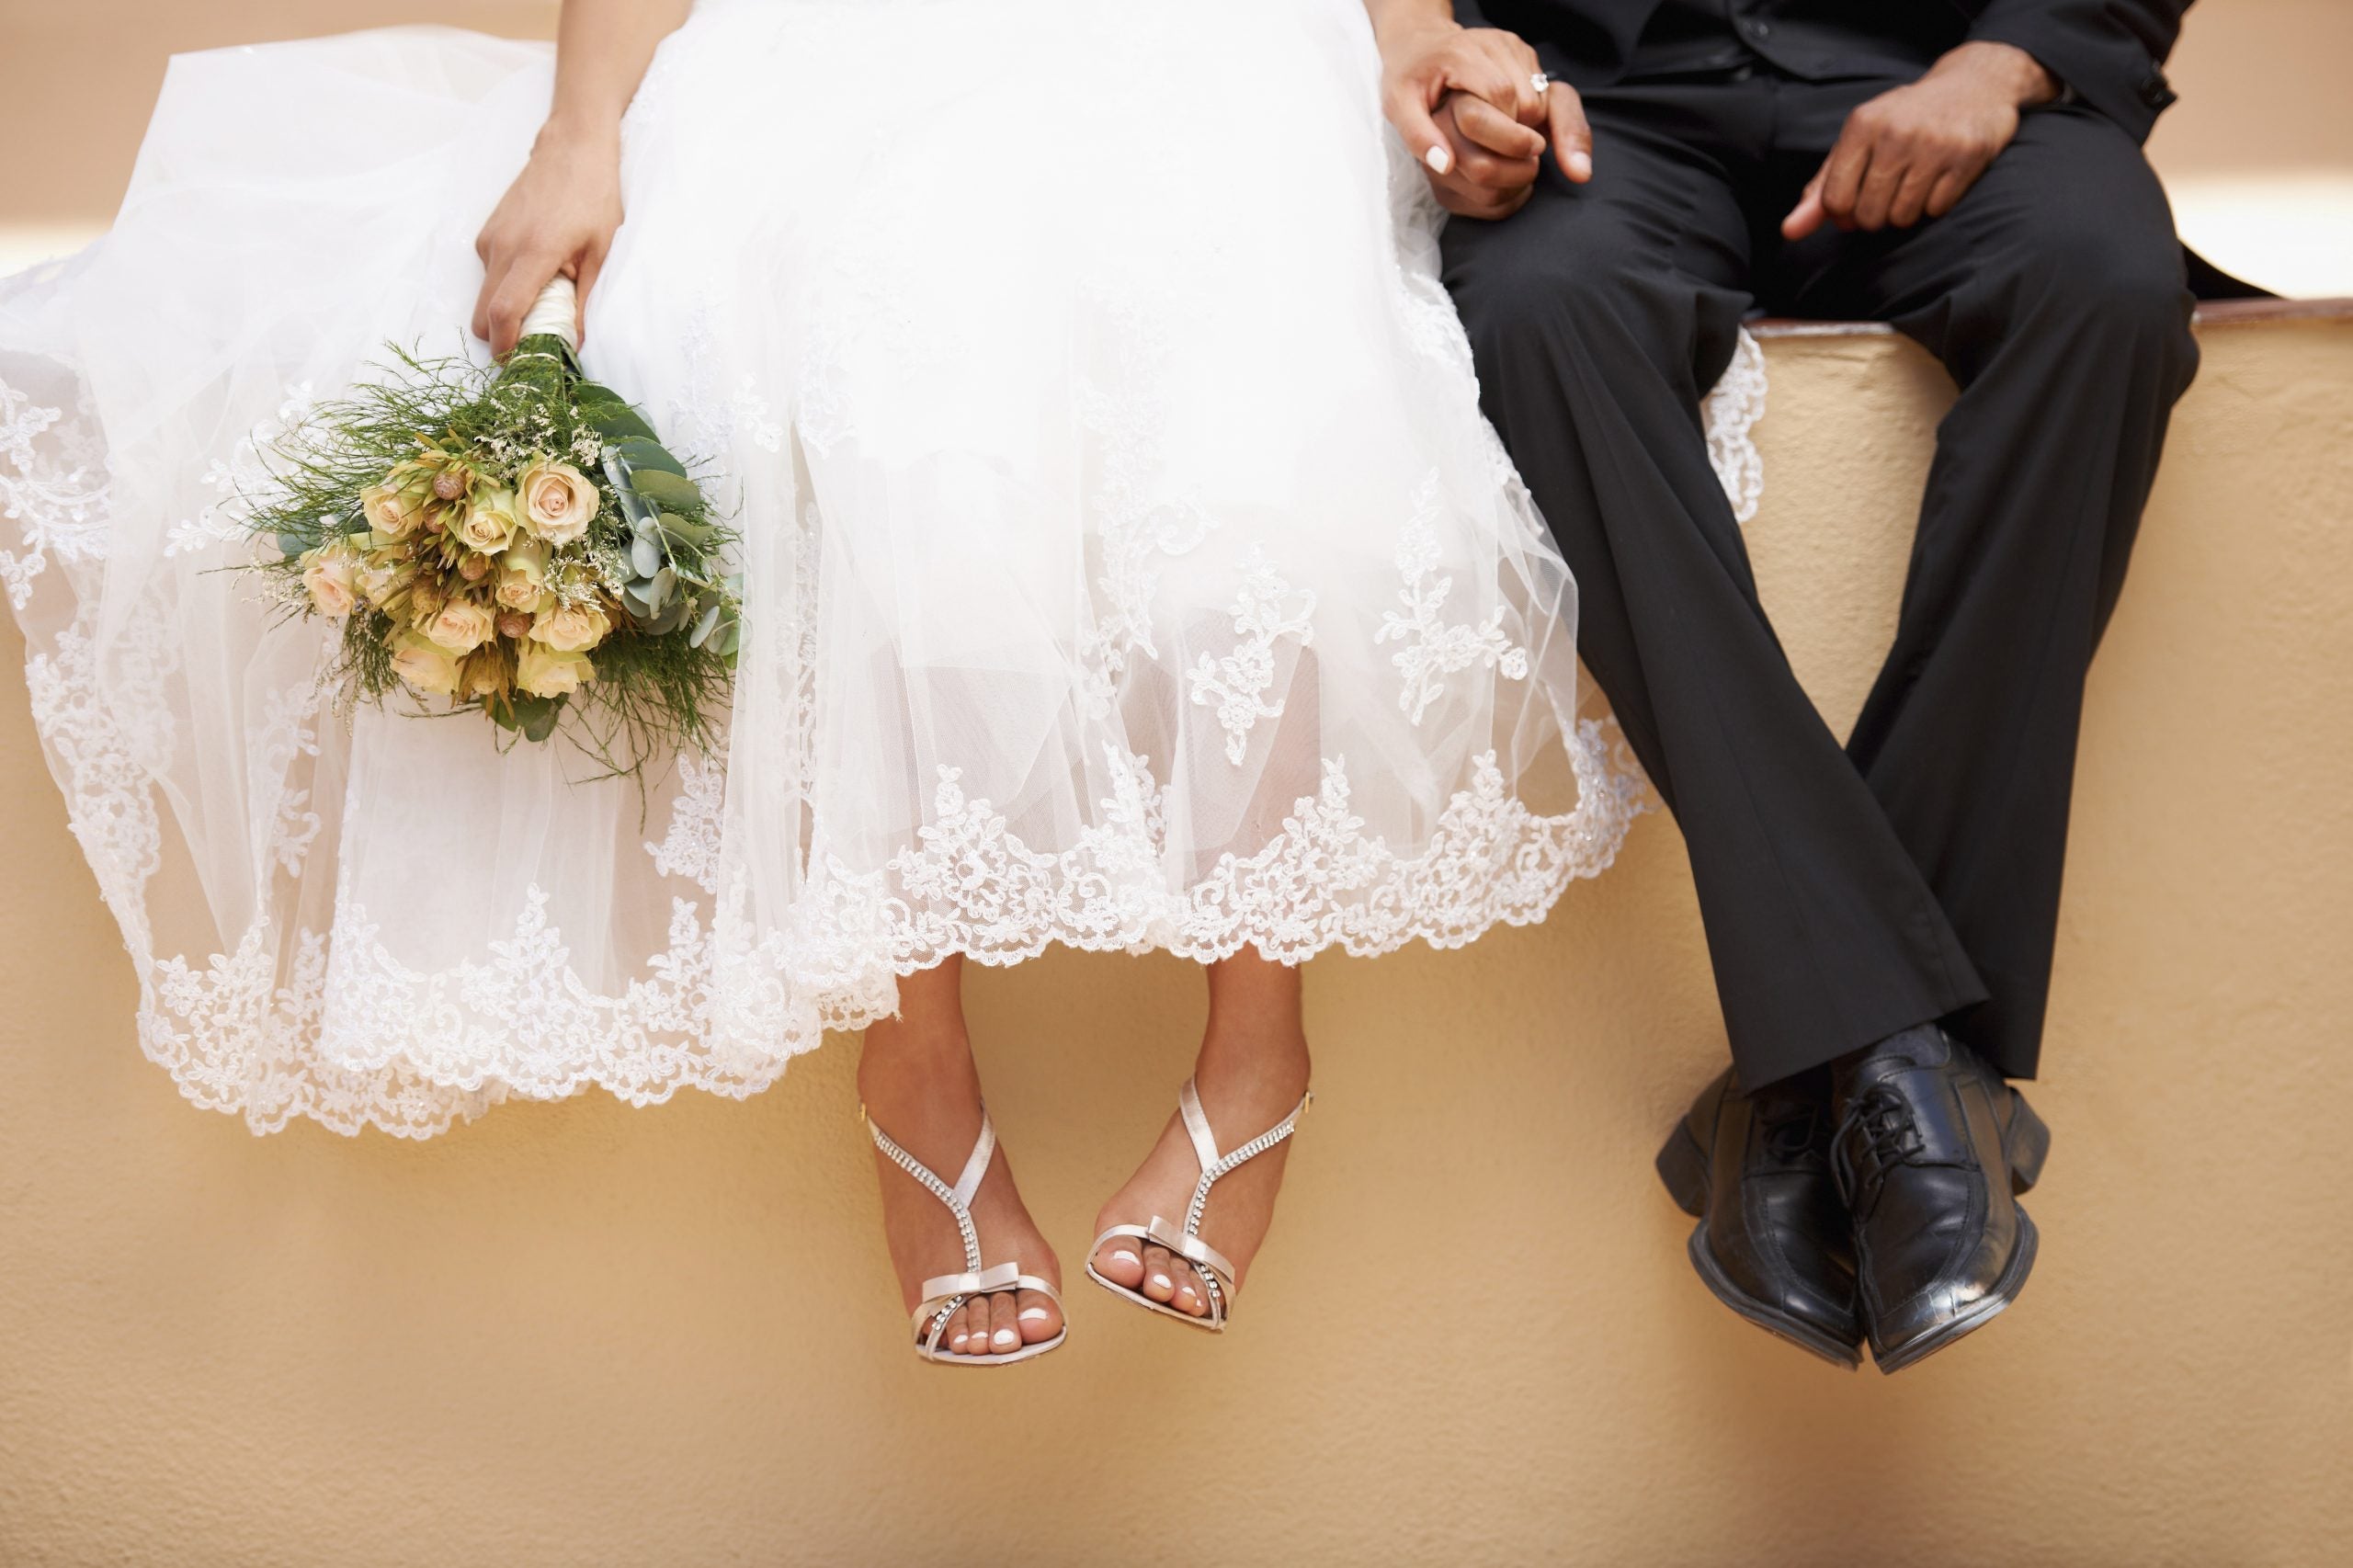 Brides In These States Spend A Year’s College Tuition On Their Wedding